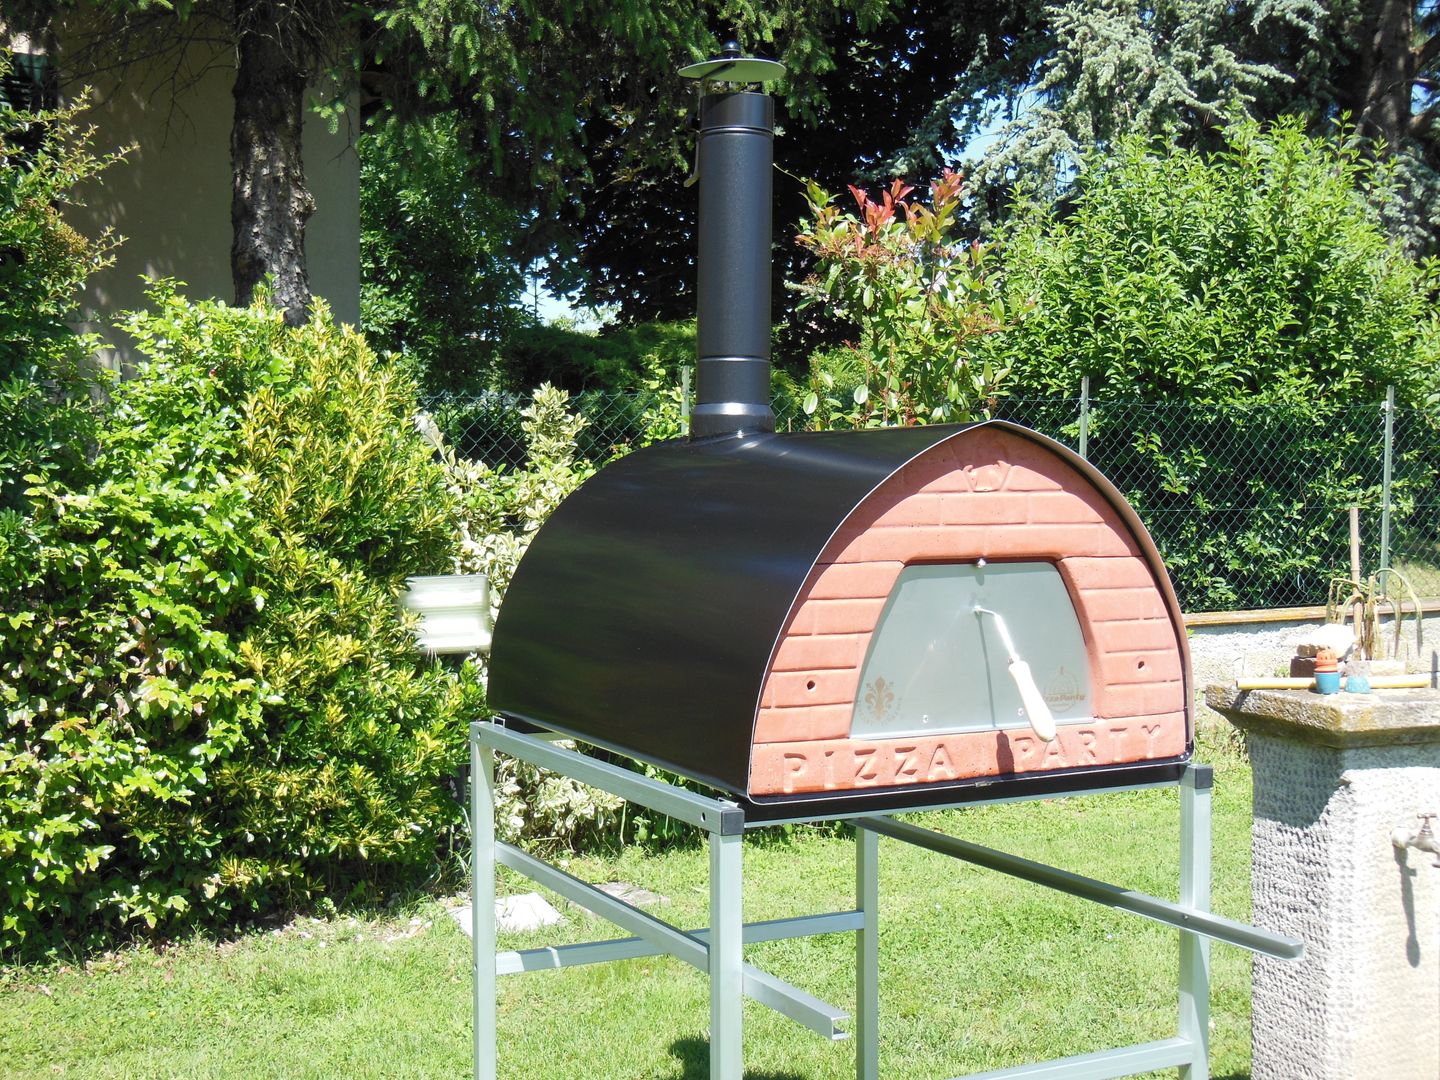 Wood fired pizza oven Pizzone by Pizza Party Genotema SRL Unipersonale Rustic style garden Fire pits & barbecues